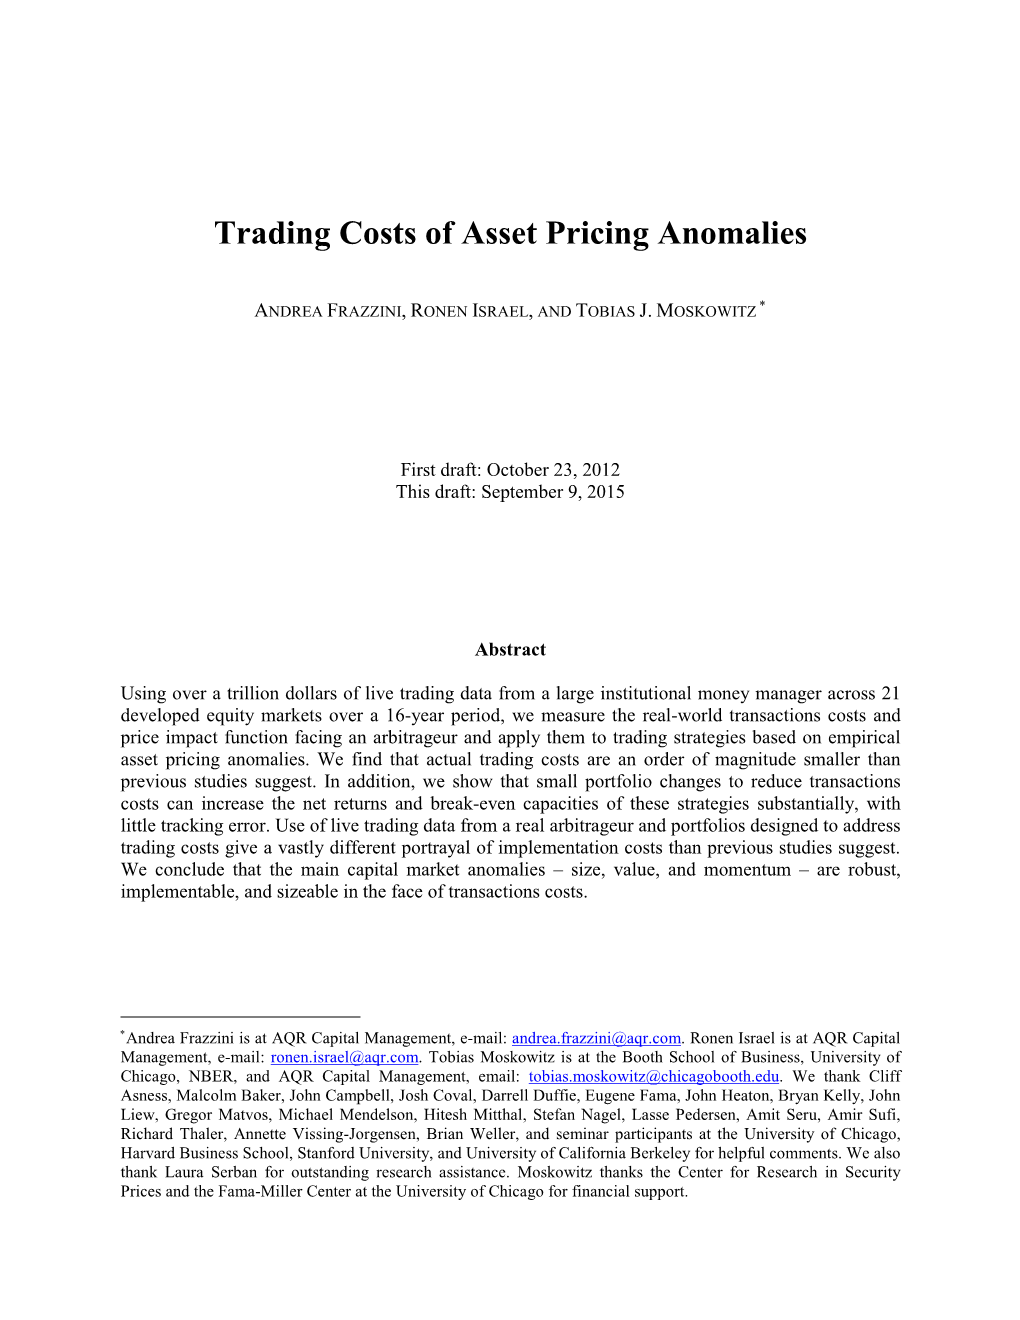 Trading Cost of Asset Pricing Anomalies